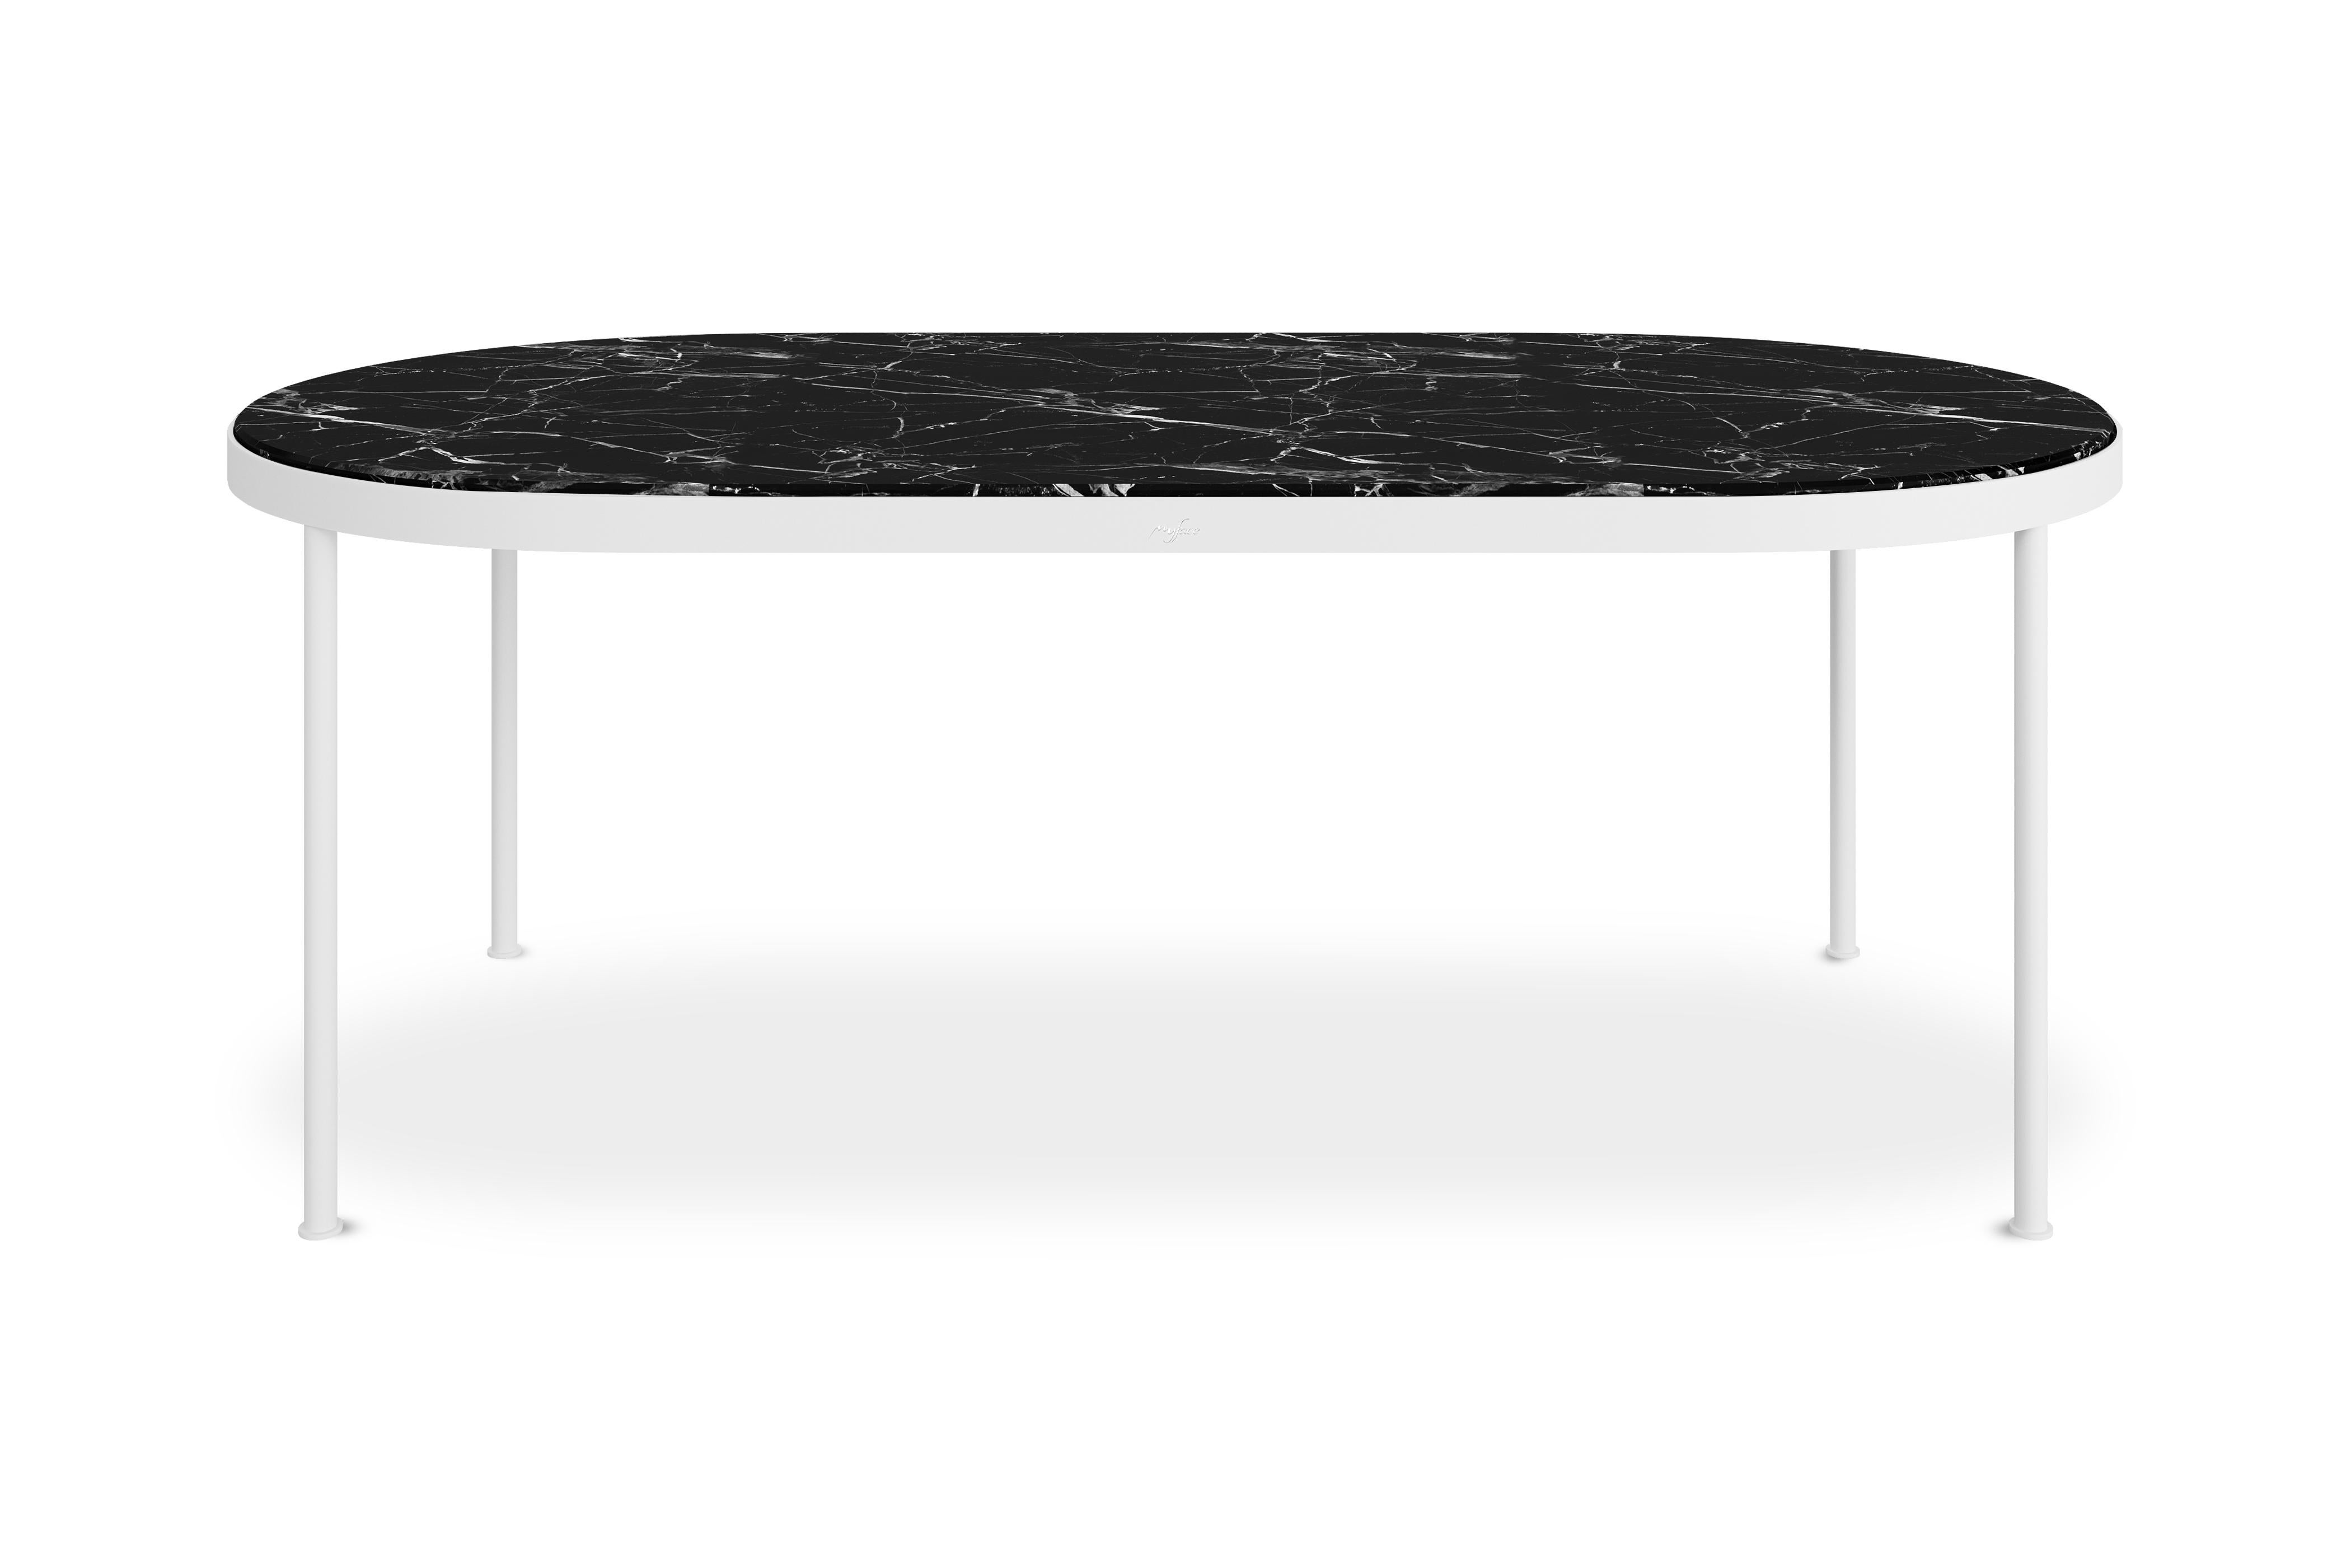 Portuguese Modern Nero Marquina Marble Outdoor Dining Table Big with Lacquered Legs For Sale